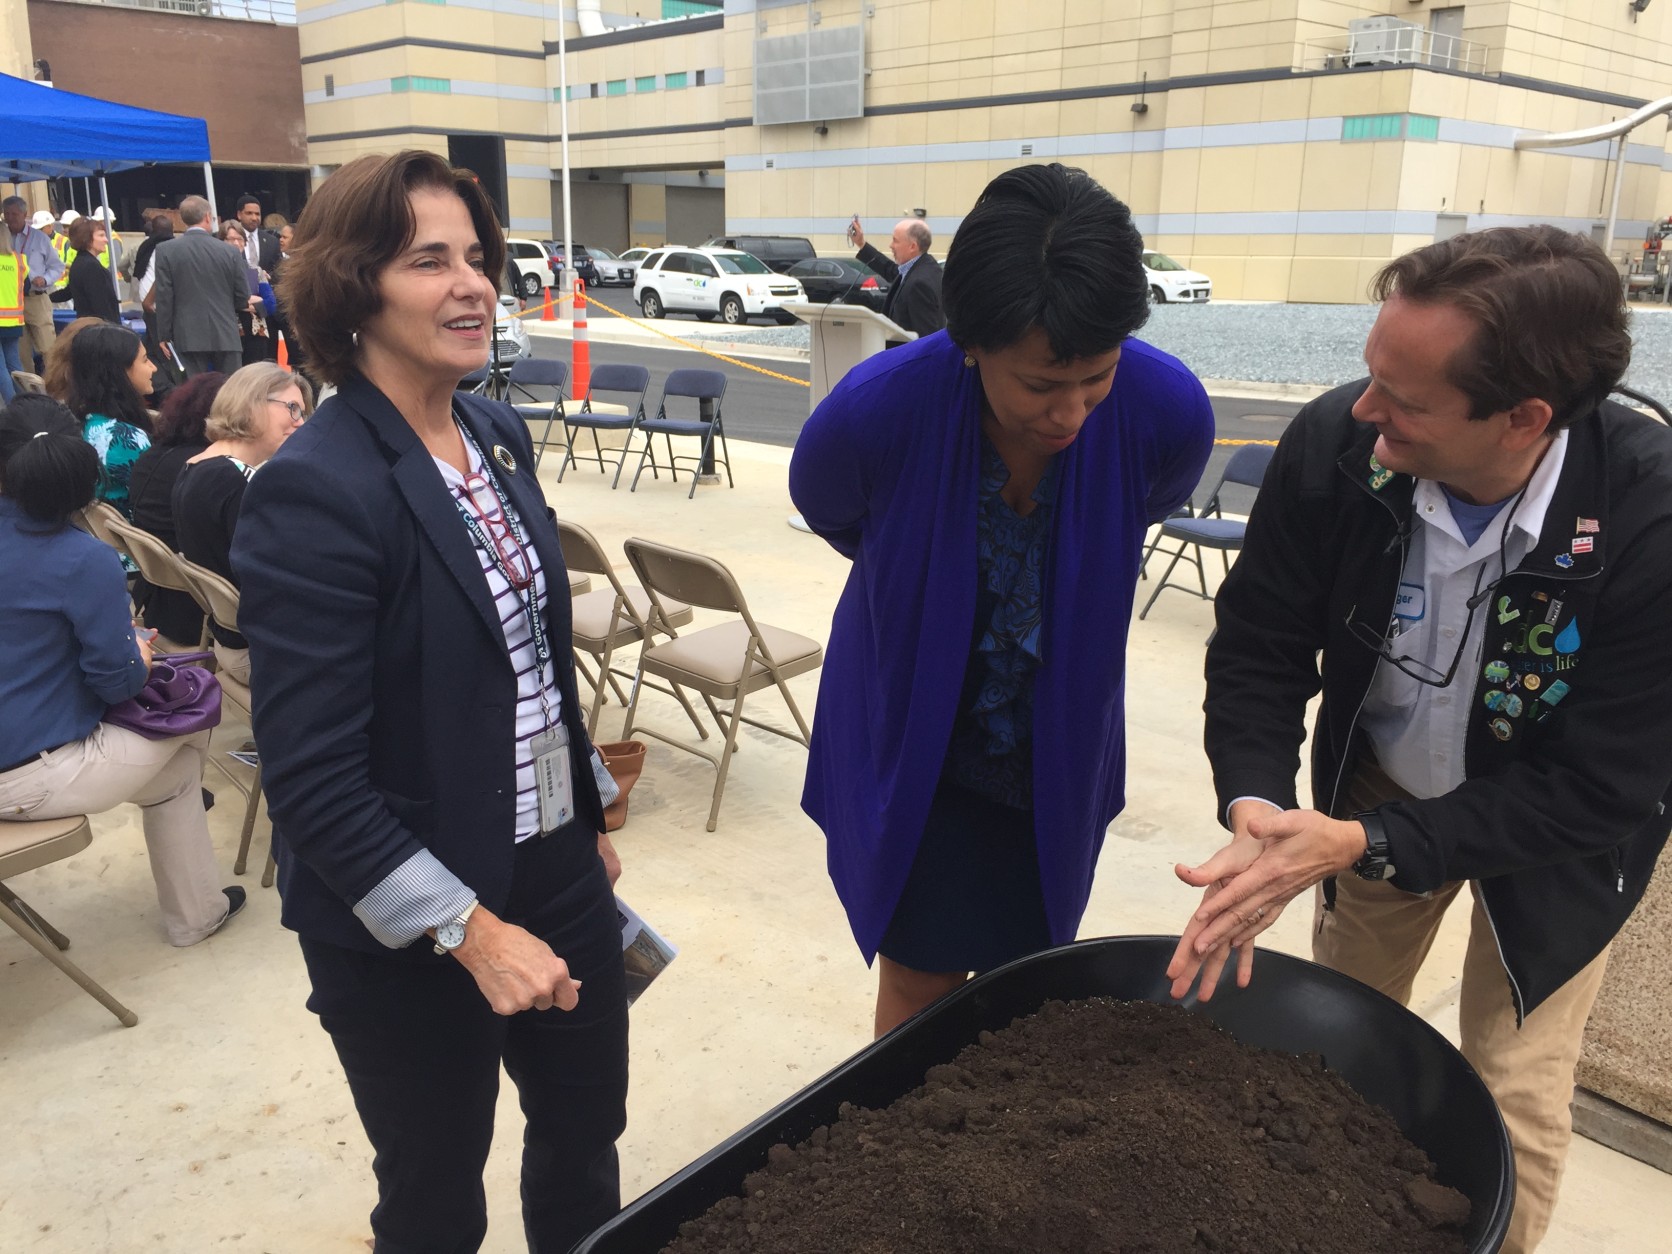 George Hawkins, right, shows Mayor Muriel Bowser the remaining compost-like material, as council member Mary Cheh looks on. (WTOP/Andrew Mollenbeck)